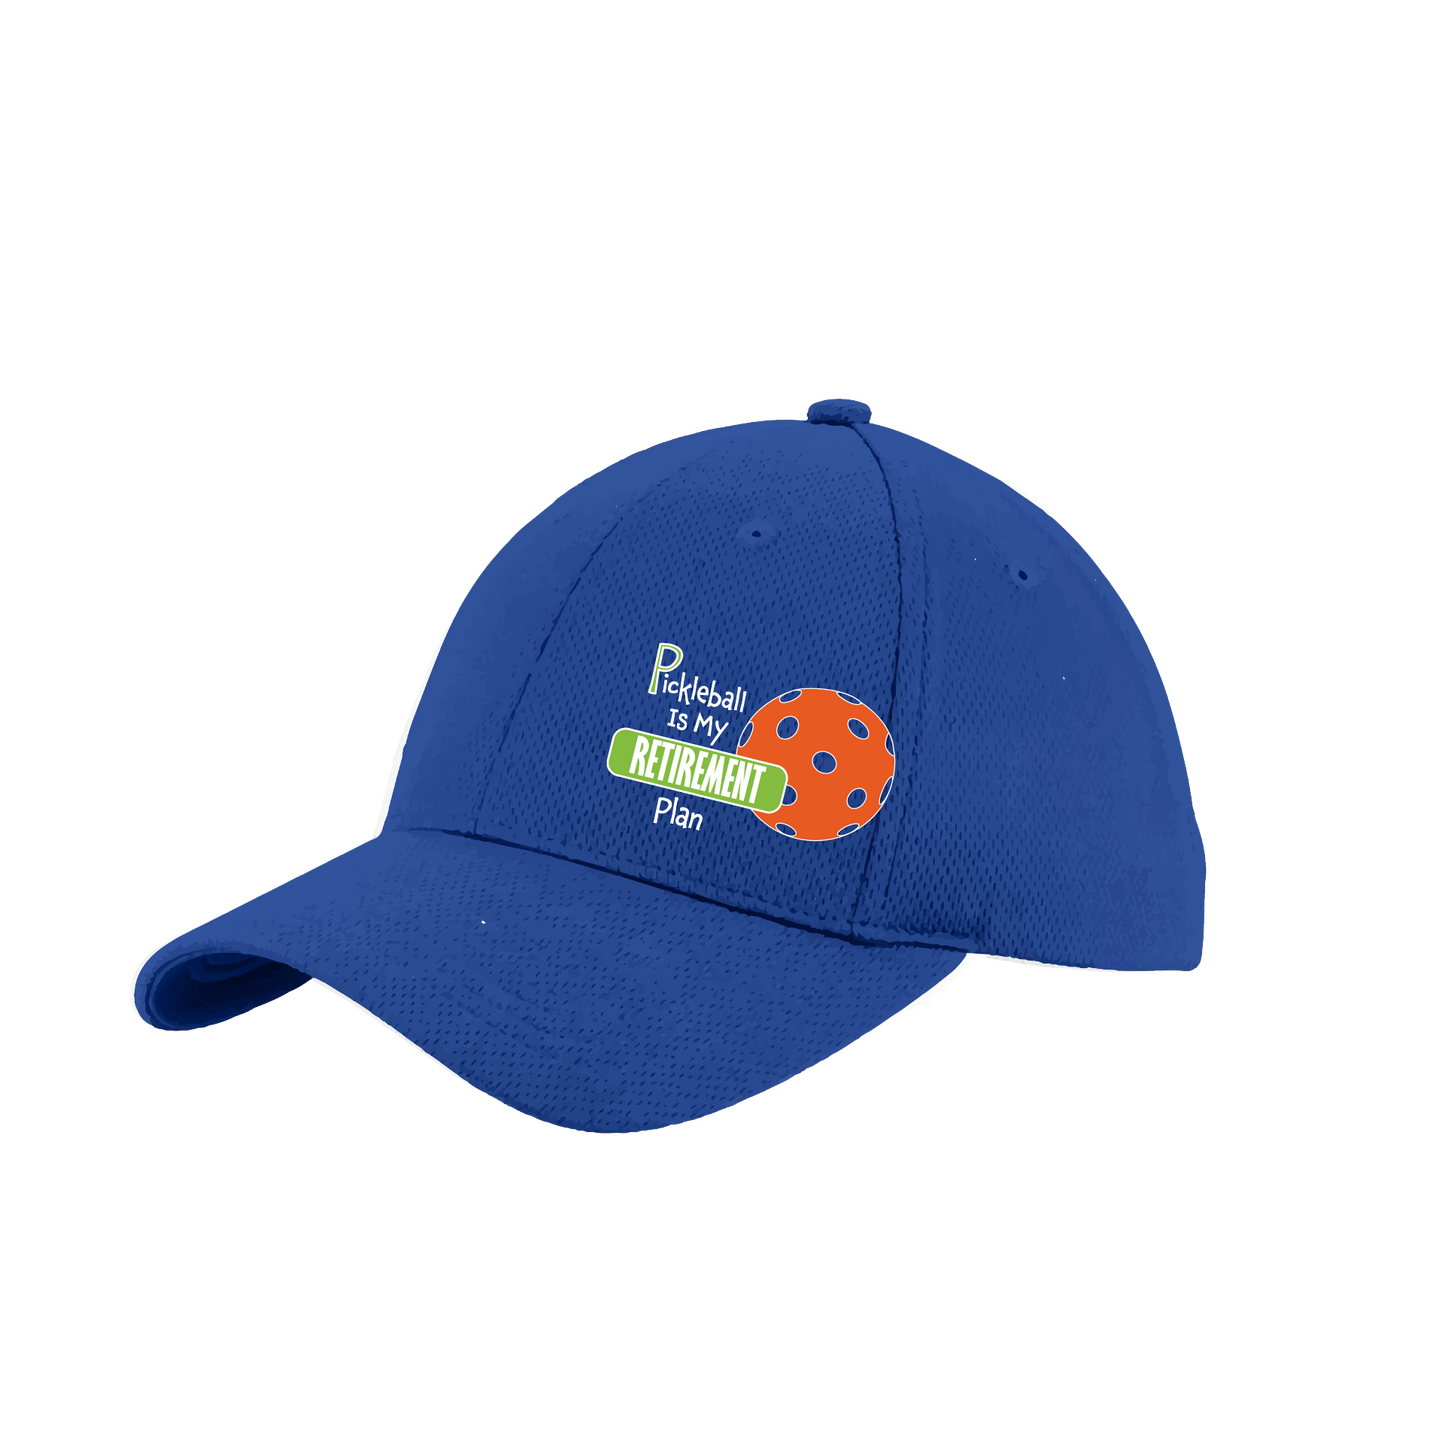 Pickleball Hat Design: Pickleball is my Retirement Plan  This fun pickleball hat is the perfect accessory for all pickleball players needing to keep their focus on the game and not the sun. The moisture-wicking material is made of 100% polyester with closed-hole flat back mesh and PosiCharge Technology. The back closure is a hock and loop style made to adjust to every adult.